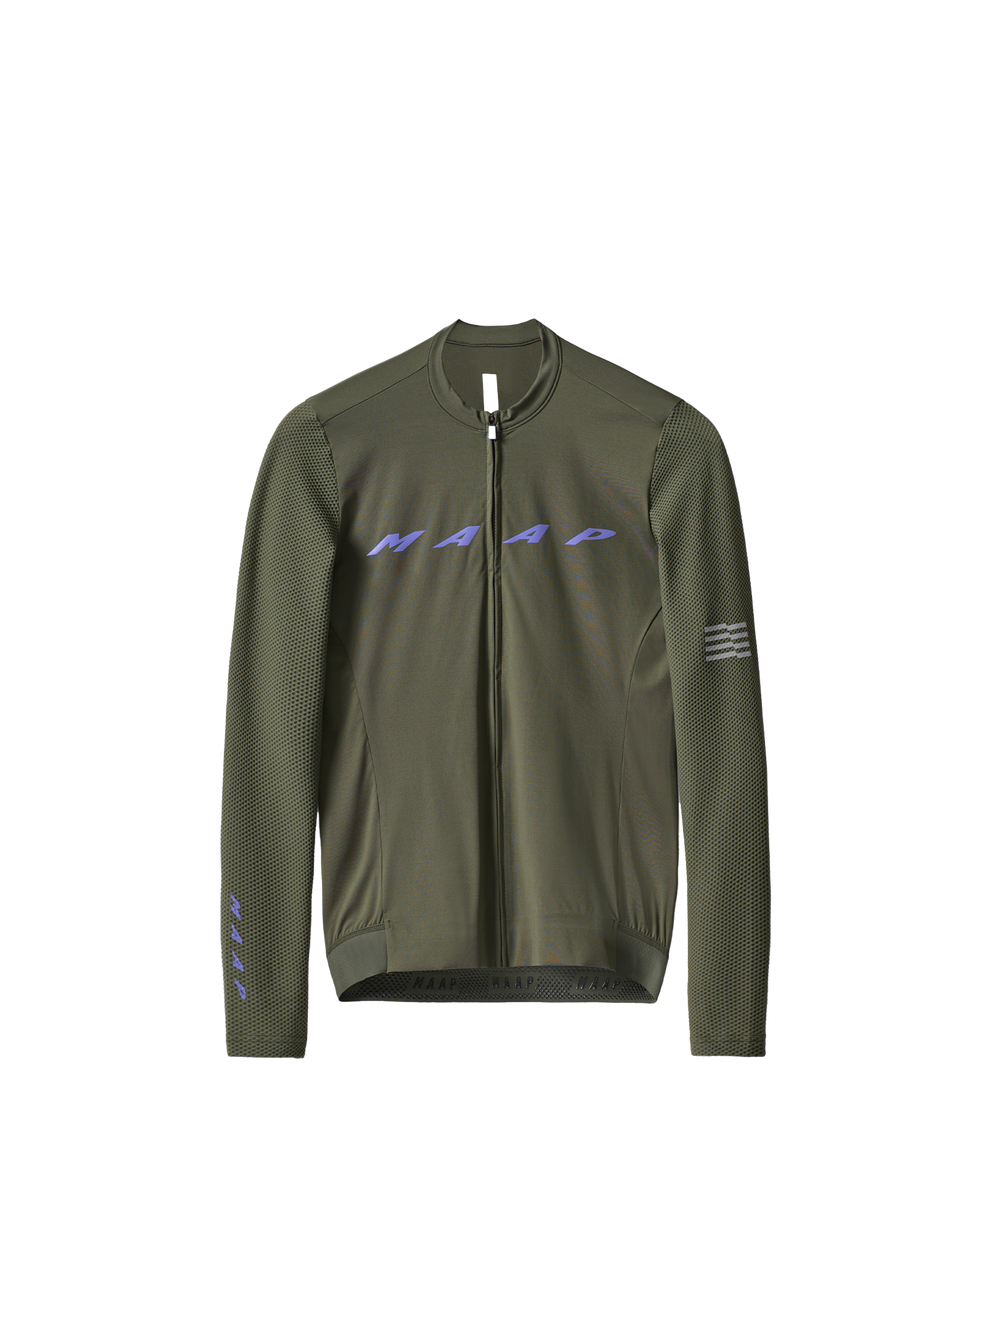 Product Image for Evade Pro Base LS Jersey 2.0